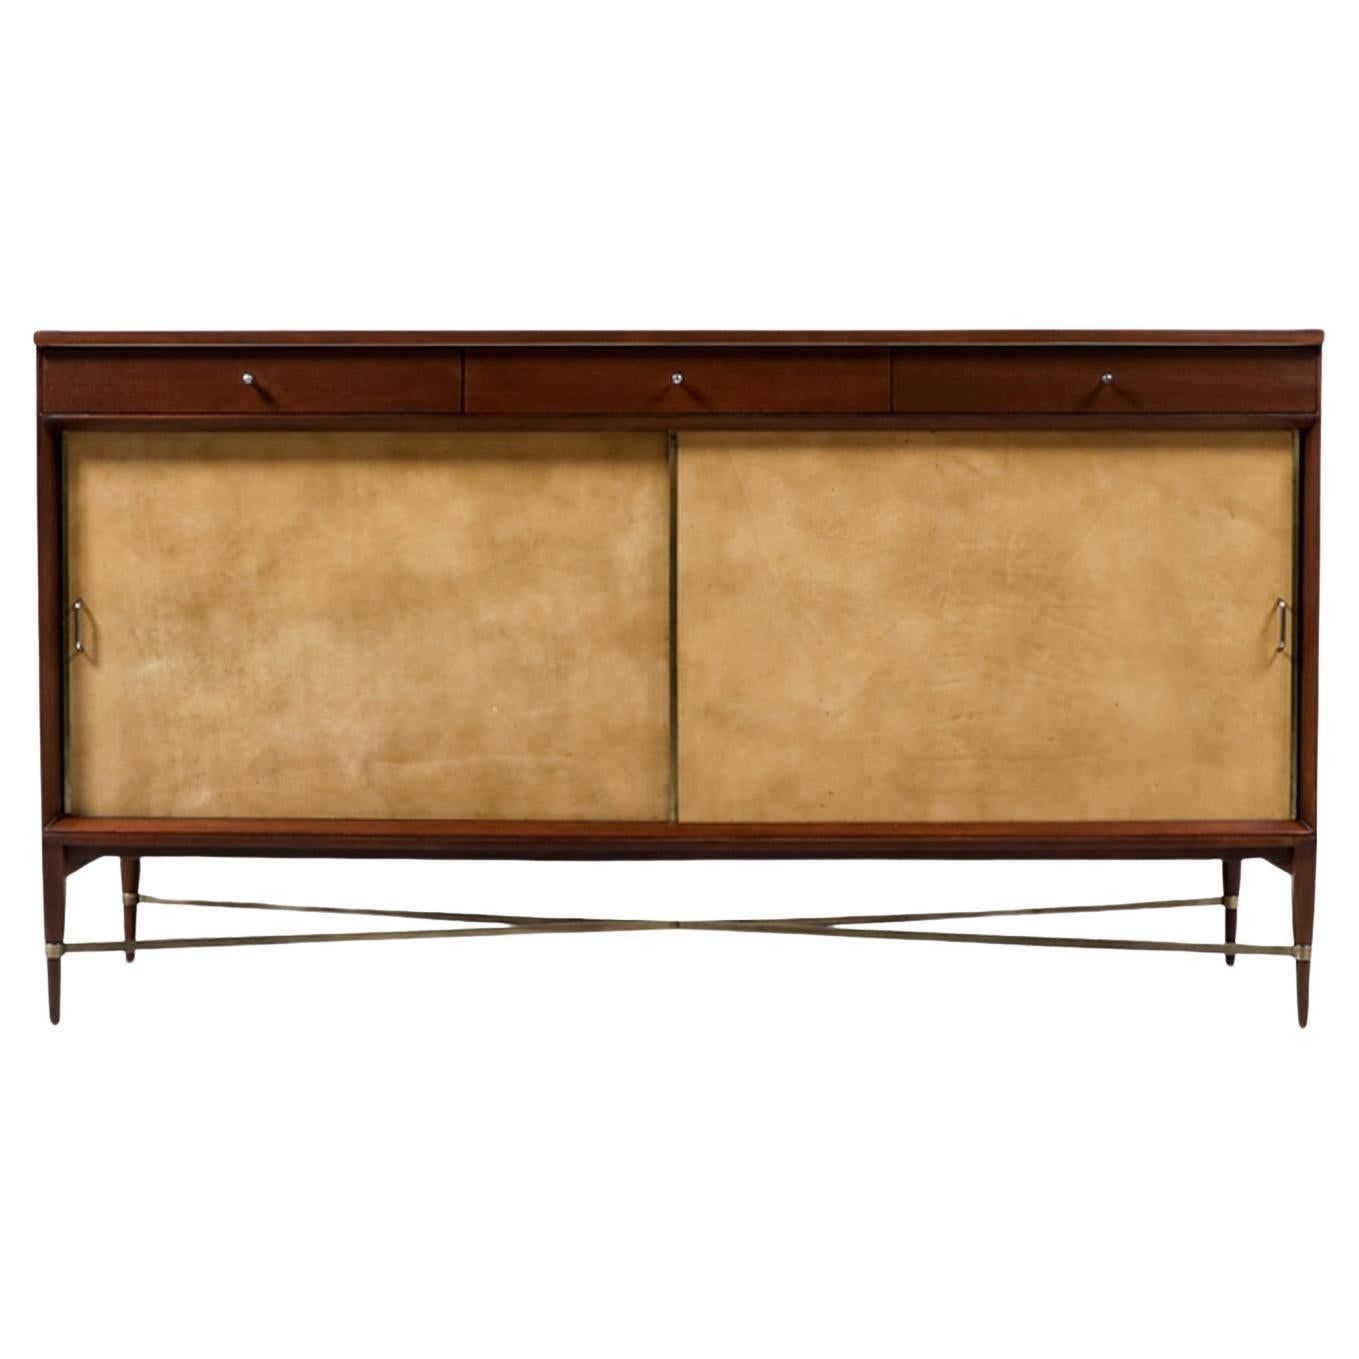 Paul McCobb "Irwin Collection" Credenza with Leather Doors & Brass Accents for C